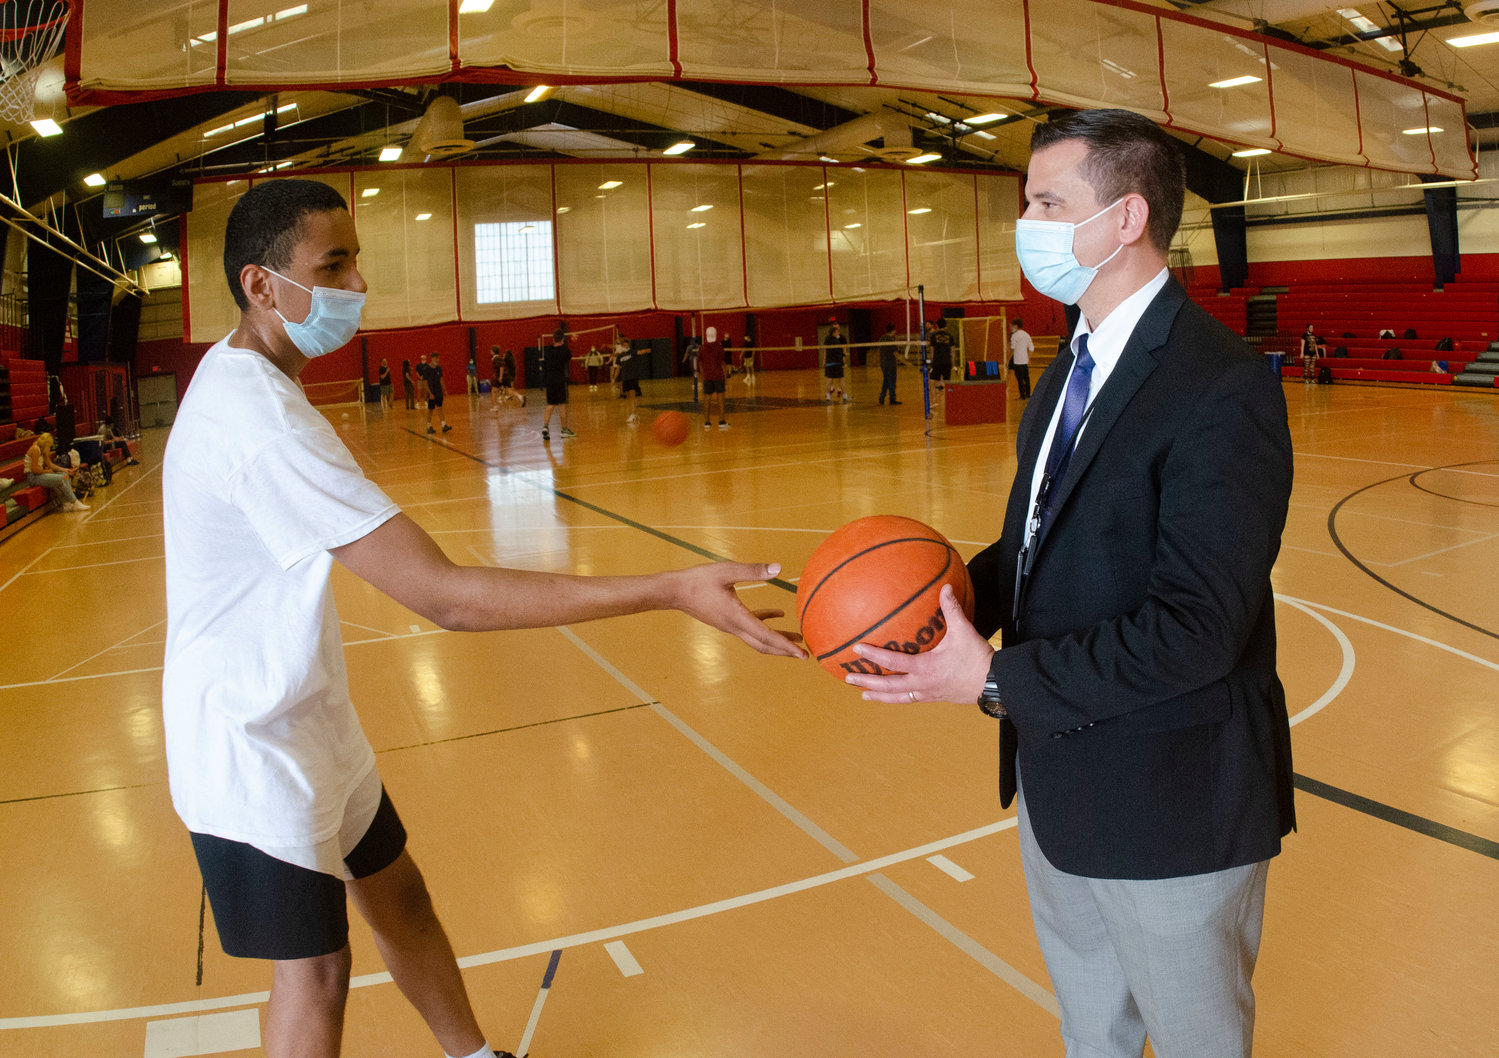 Darin Grady, a junior at Portsmouth High School, chats with Superintendent Thomas Kenworthy inside the field house during a recent gym class. The school district wants to install air conditioning in the building so that the floor is safe during the warmer months, and to prevent rusting of the exercise equipment upstairs.